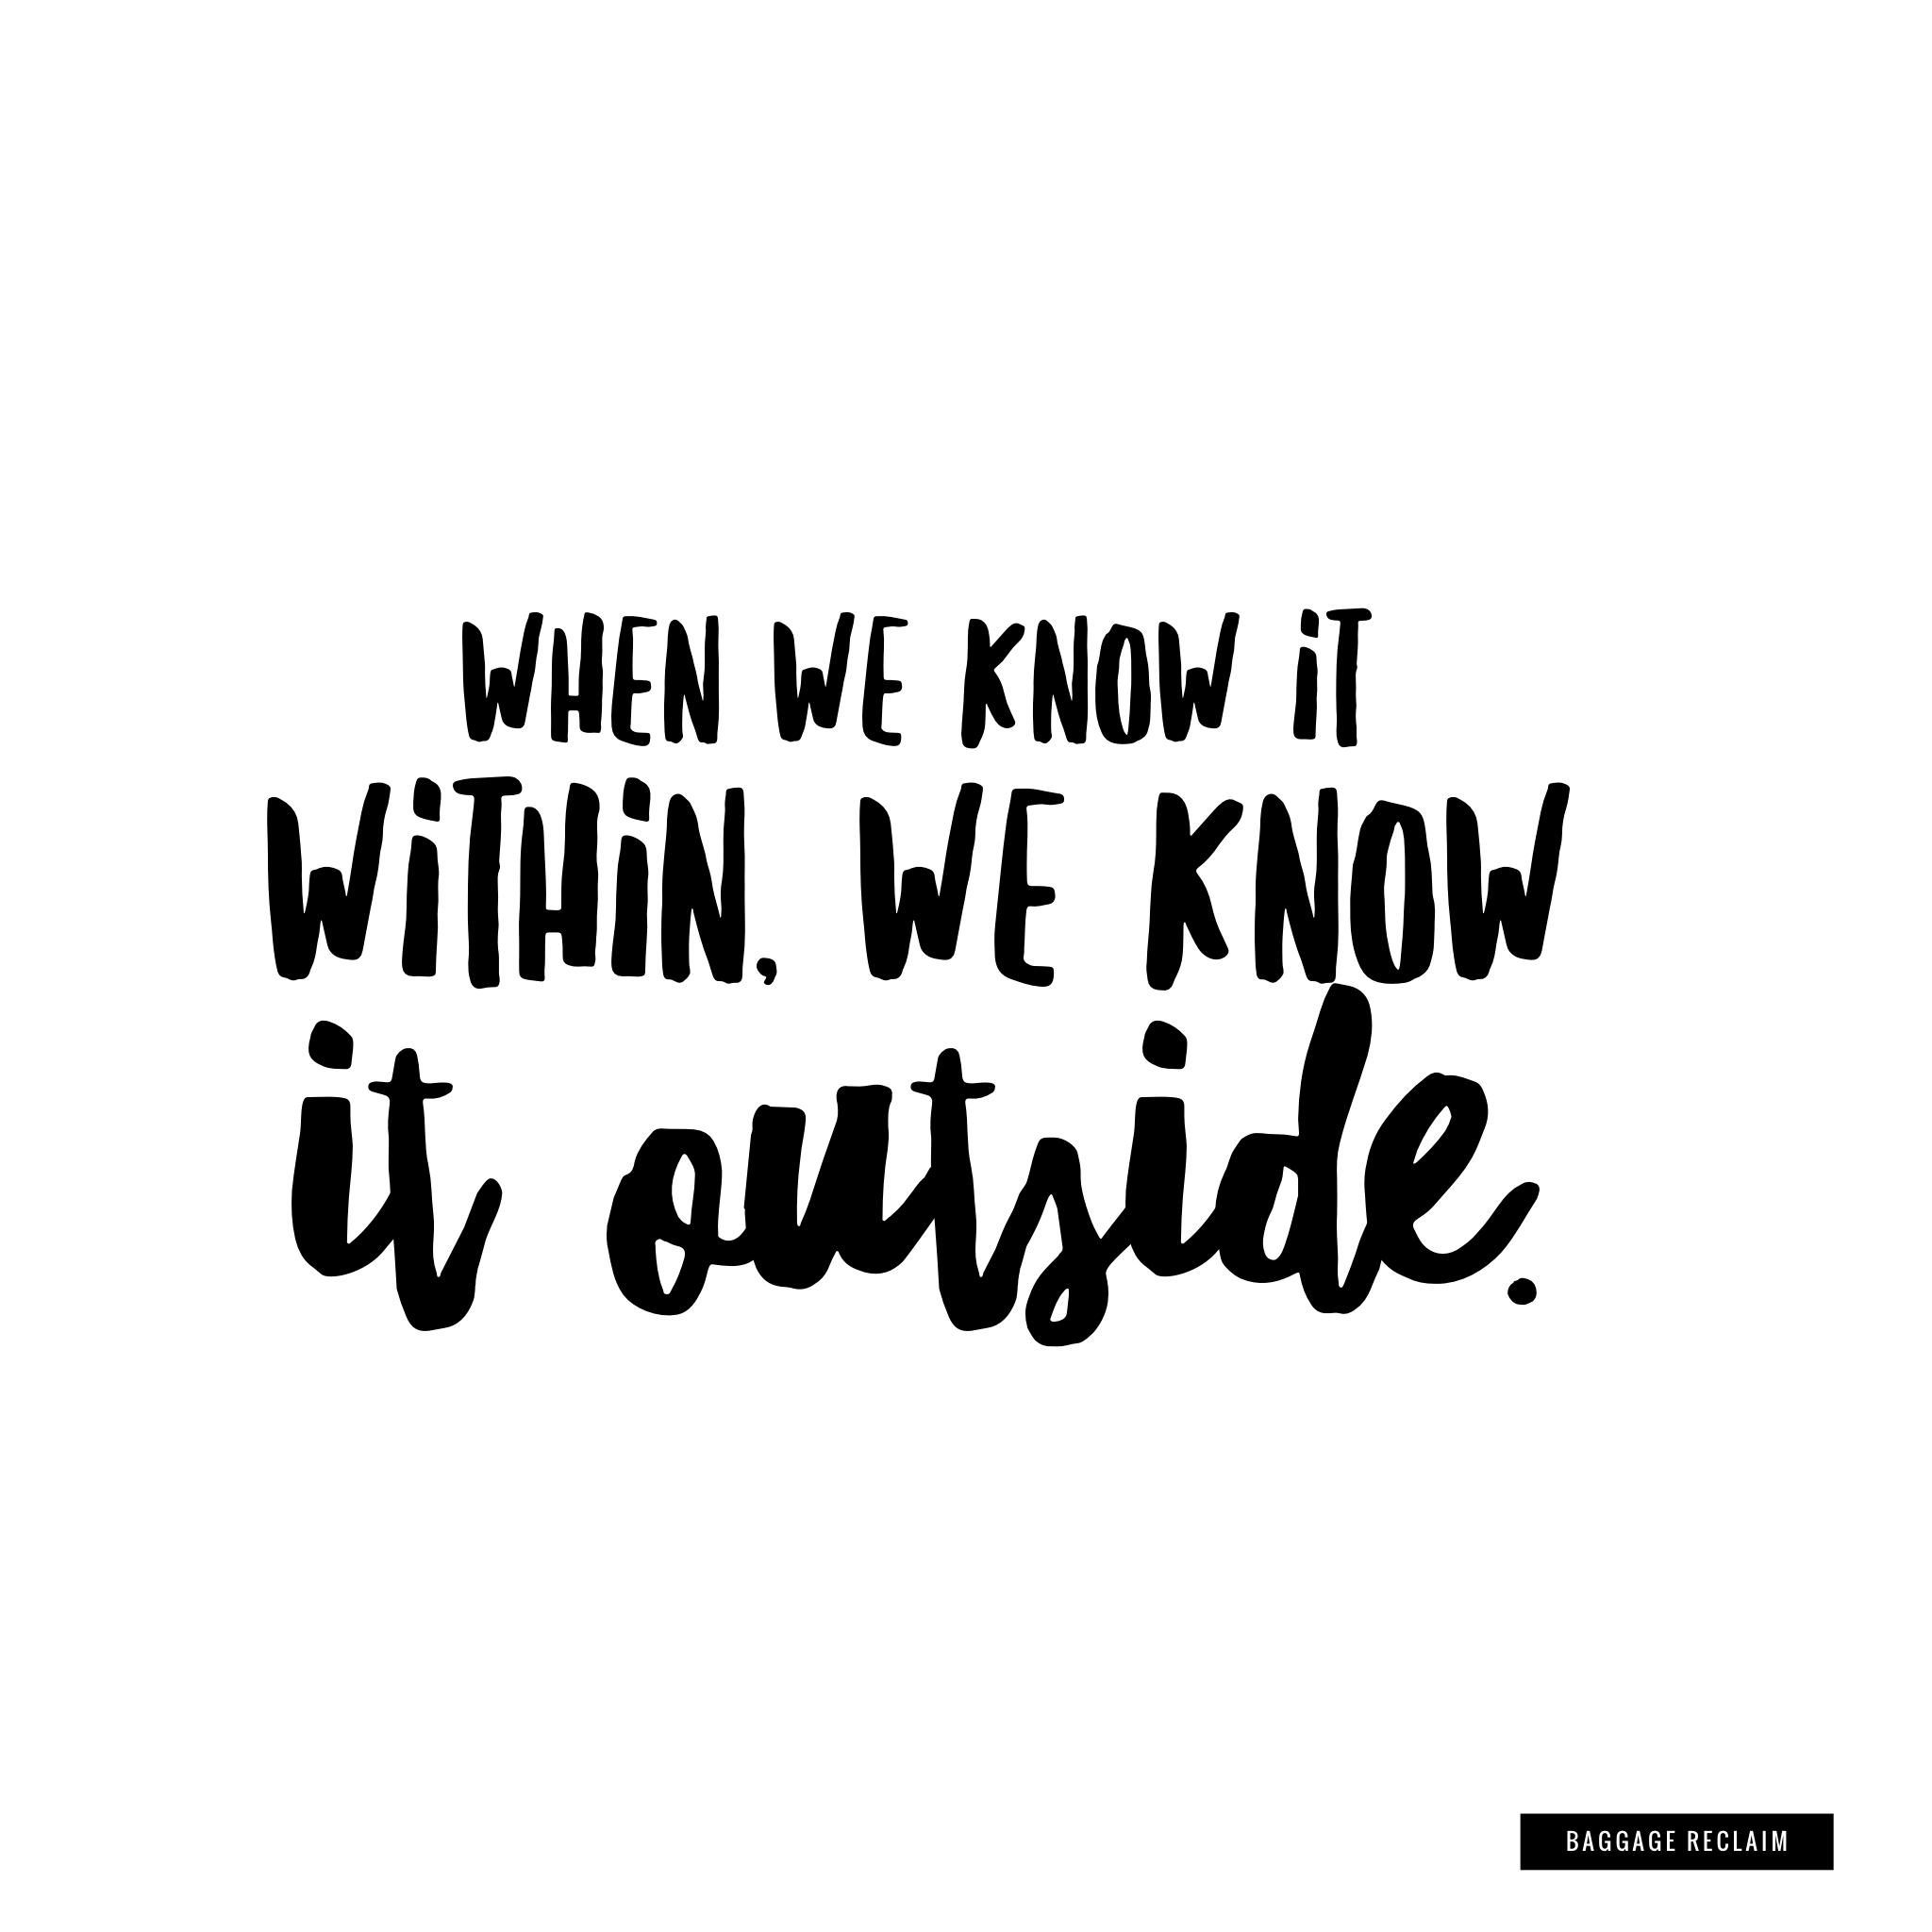 When we know it within, we know it outside.